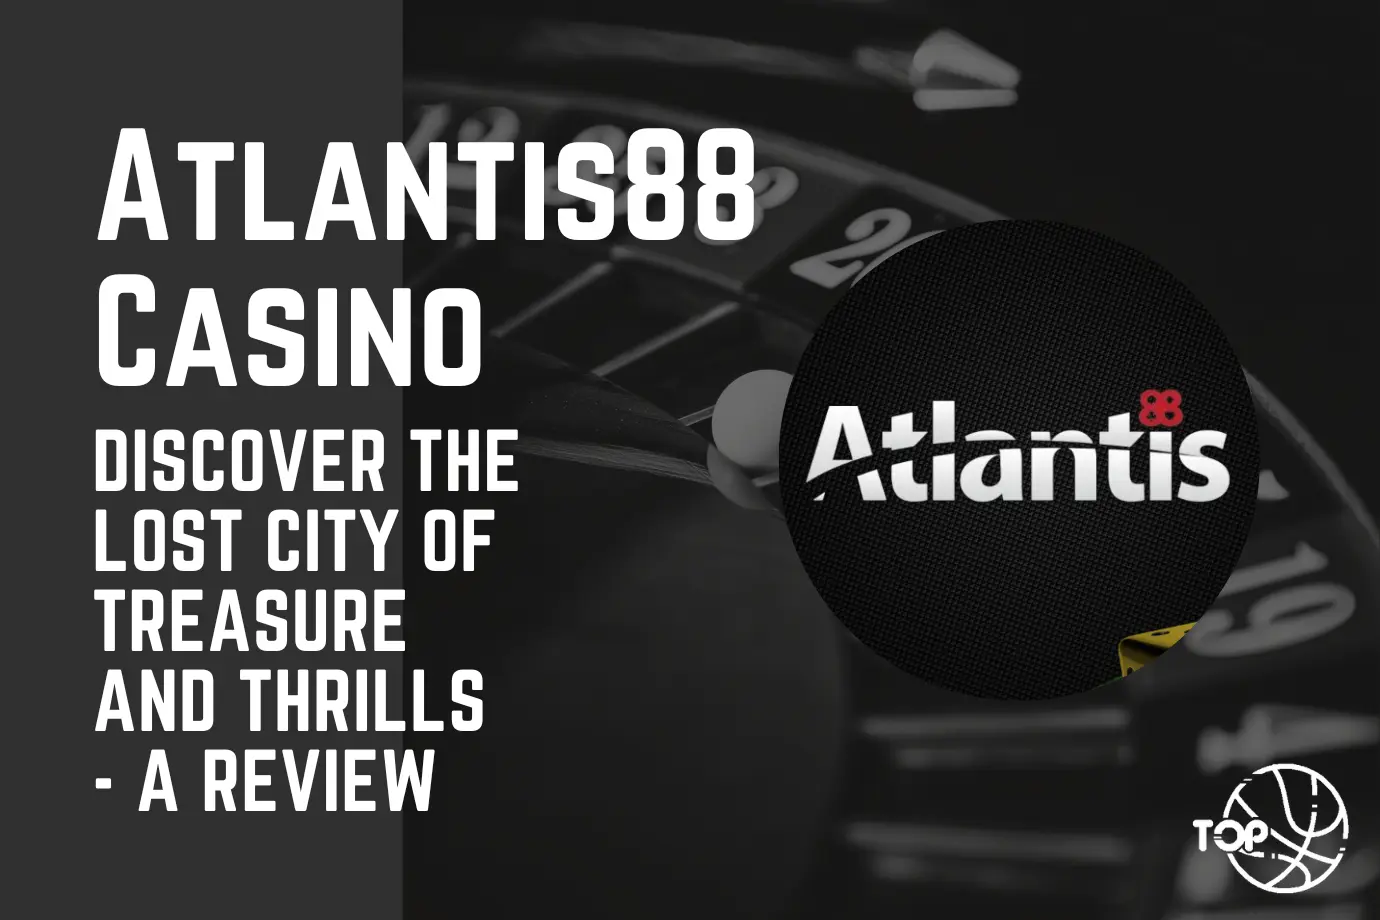 Atlantis88 Casino: Discover the Lost City of Treasure and Thrills - A Review